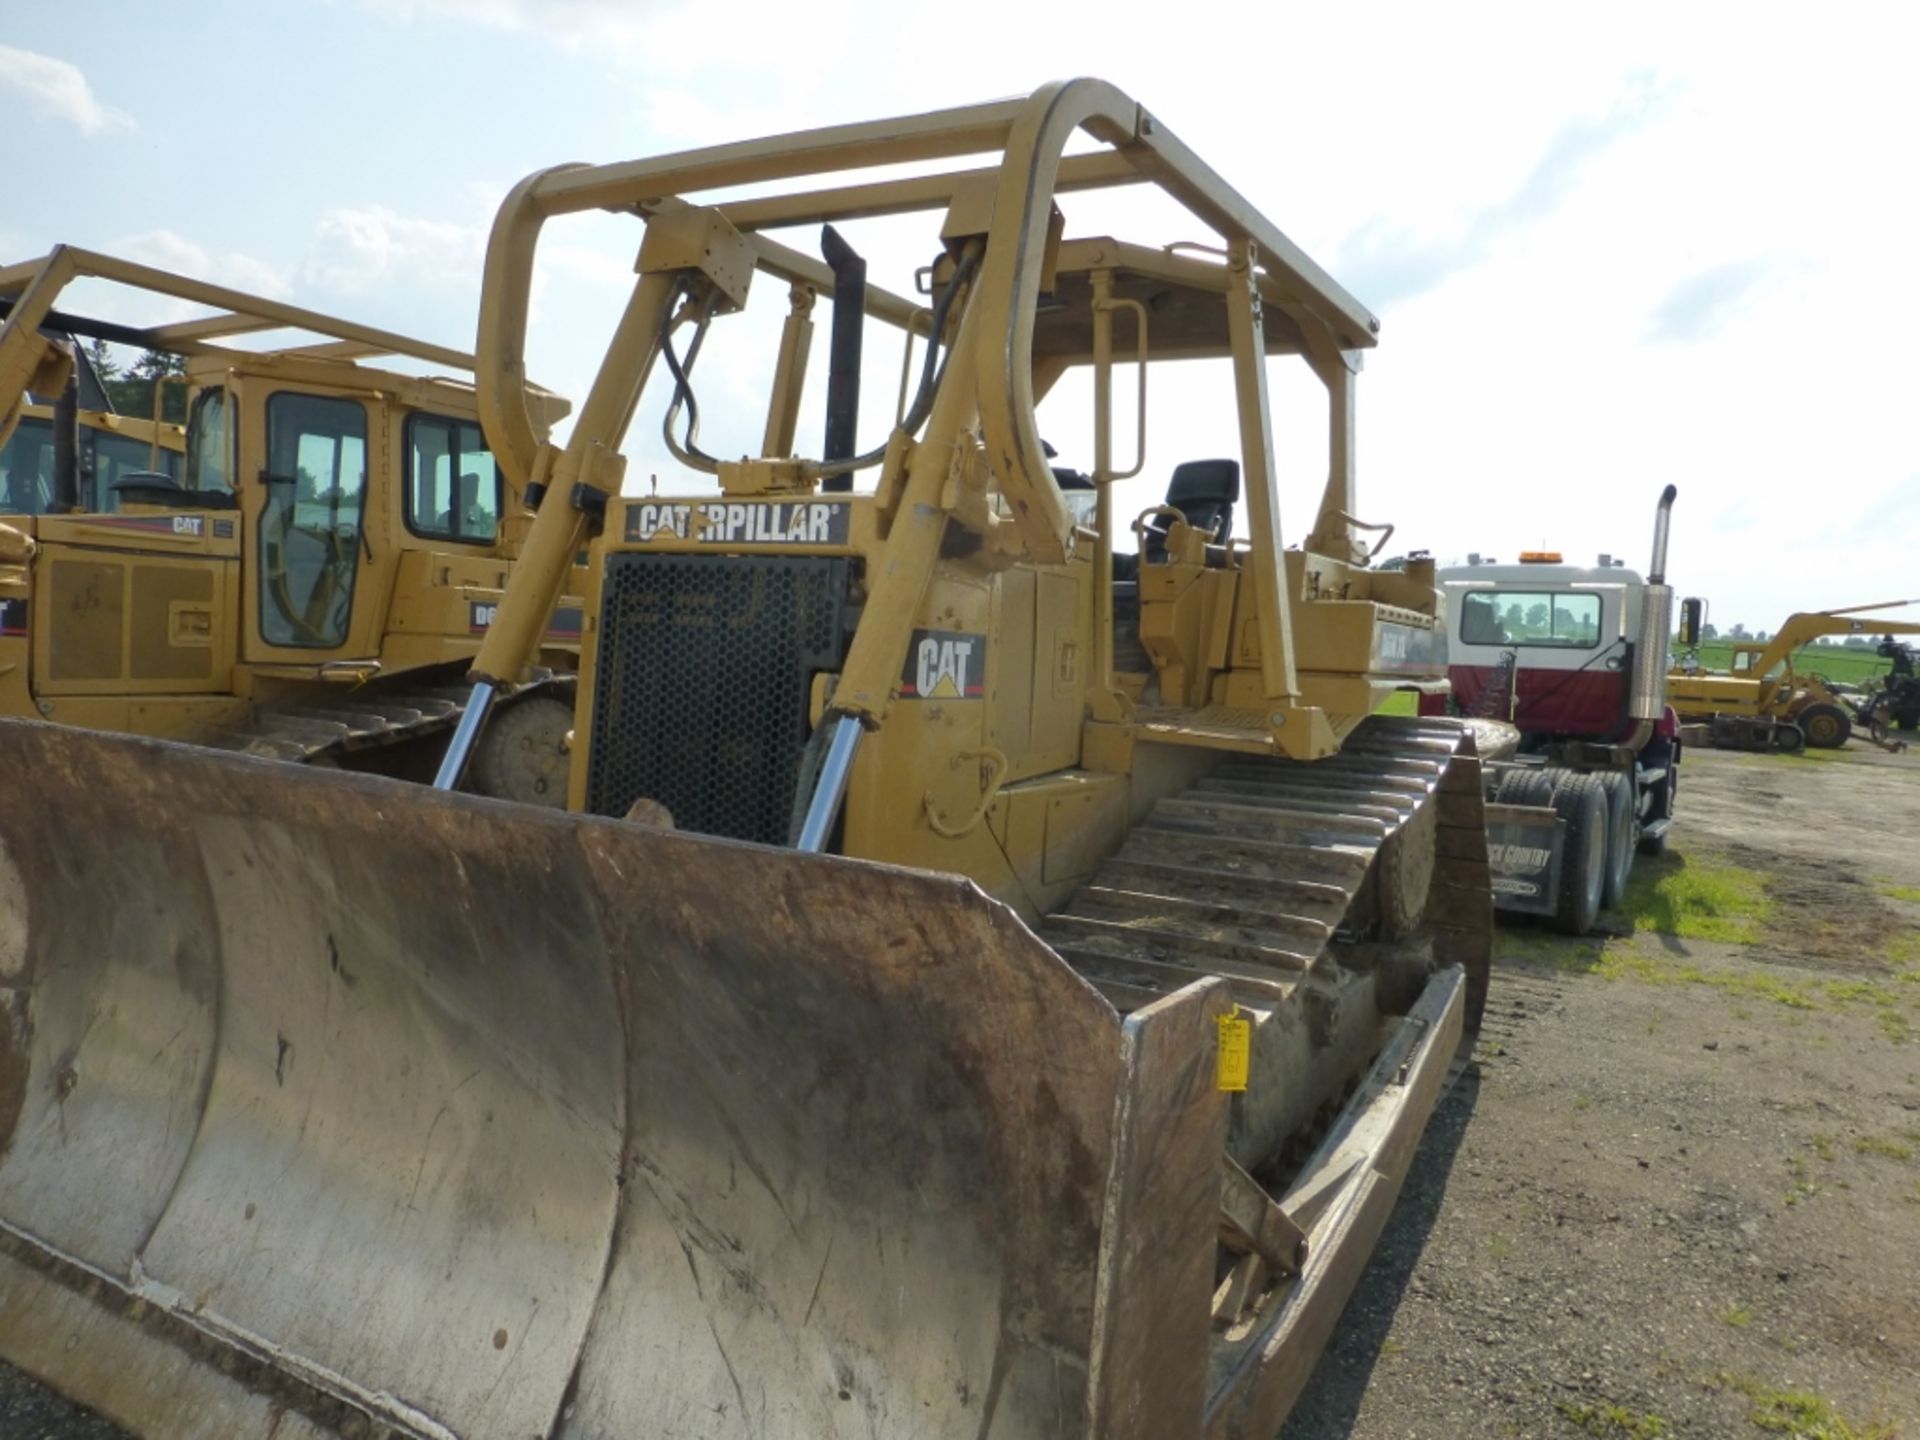 CAT D6H XL Series II, open ROPS, 30" pad. 139" blade. 17736 unverified hours. se:9kj0776 - Image 17 of 17